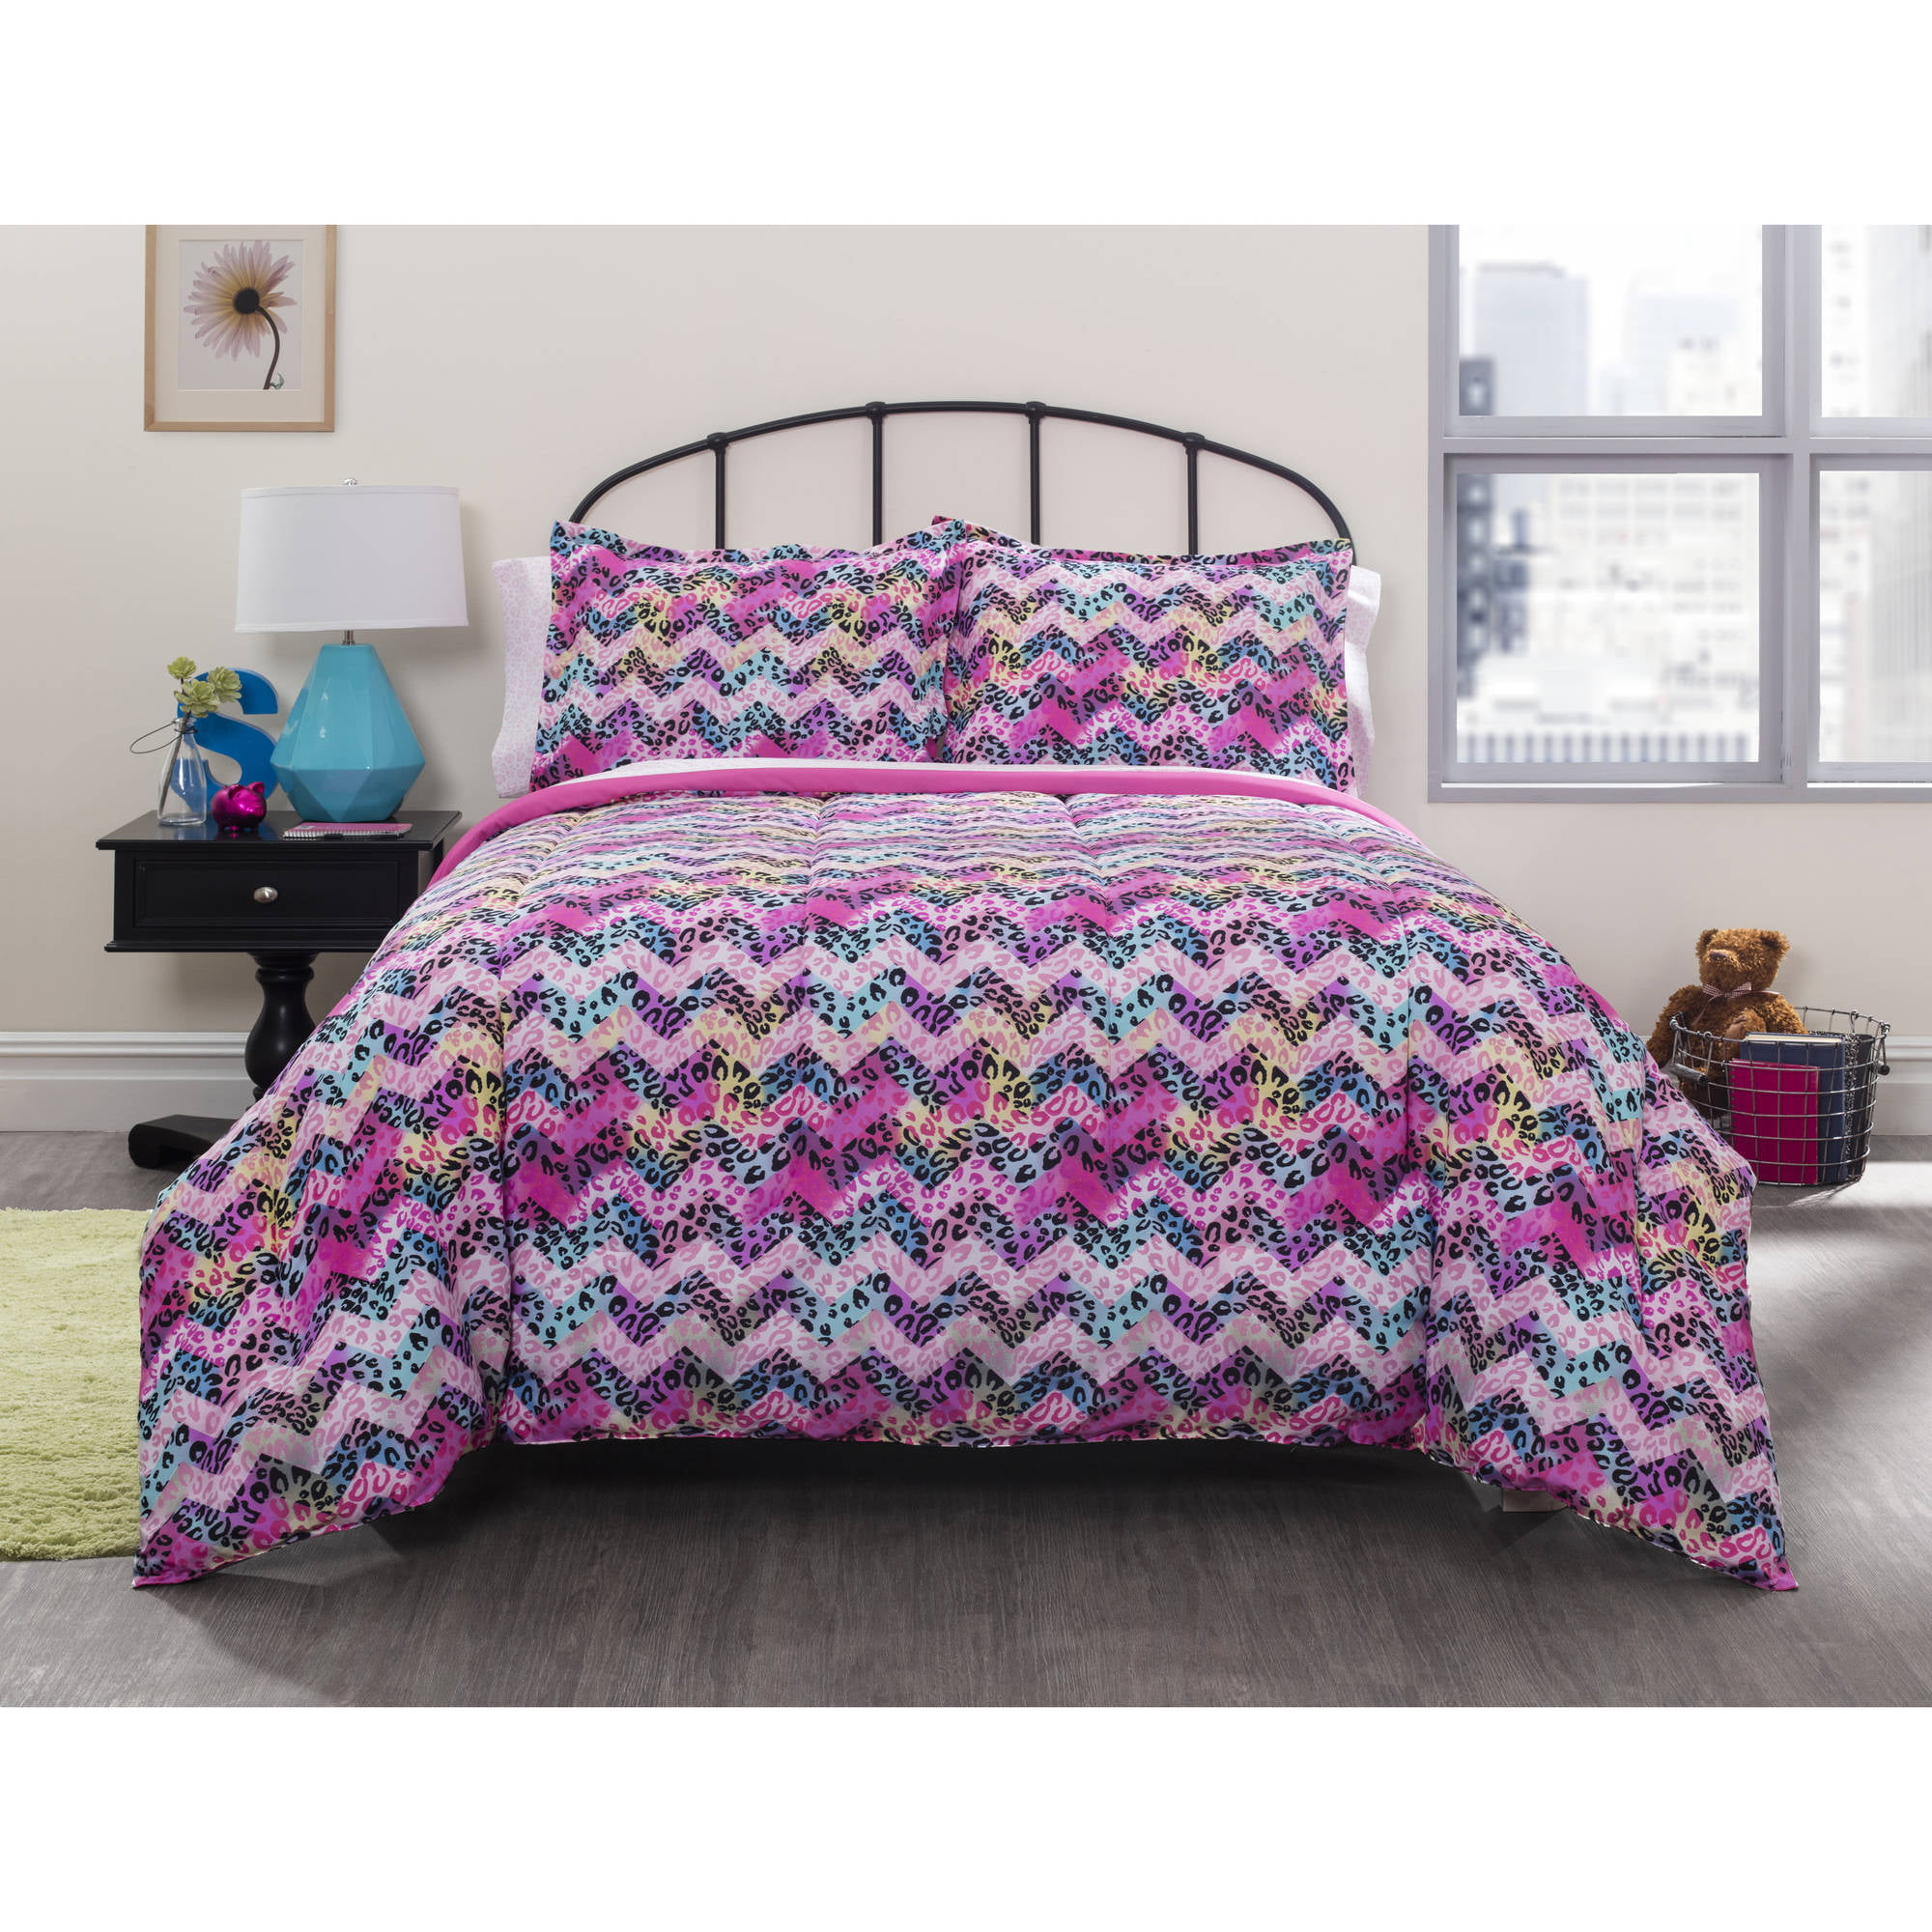 1 Each queen. Your Zone Bright Chevron Print Bed in a Bag Bedding Set 